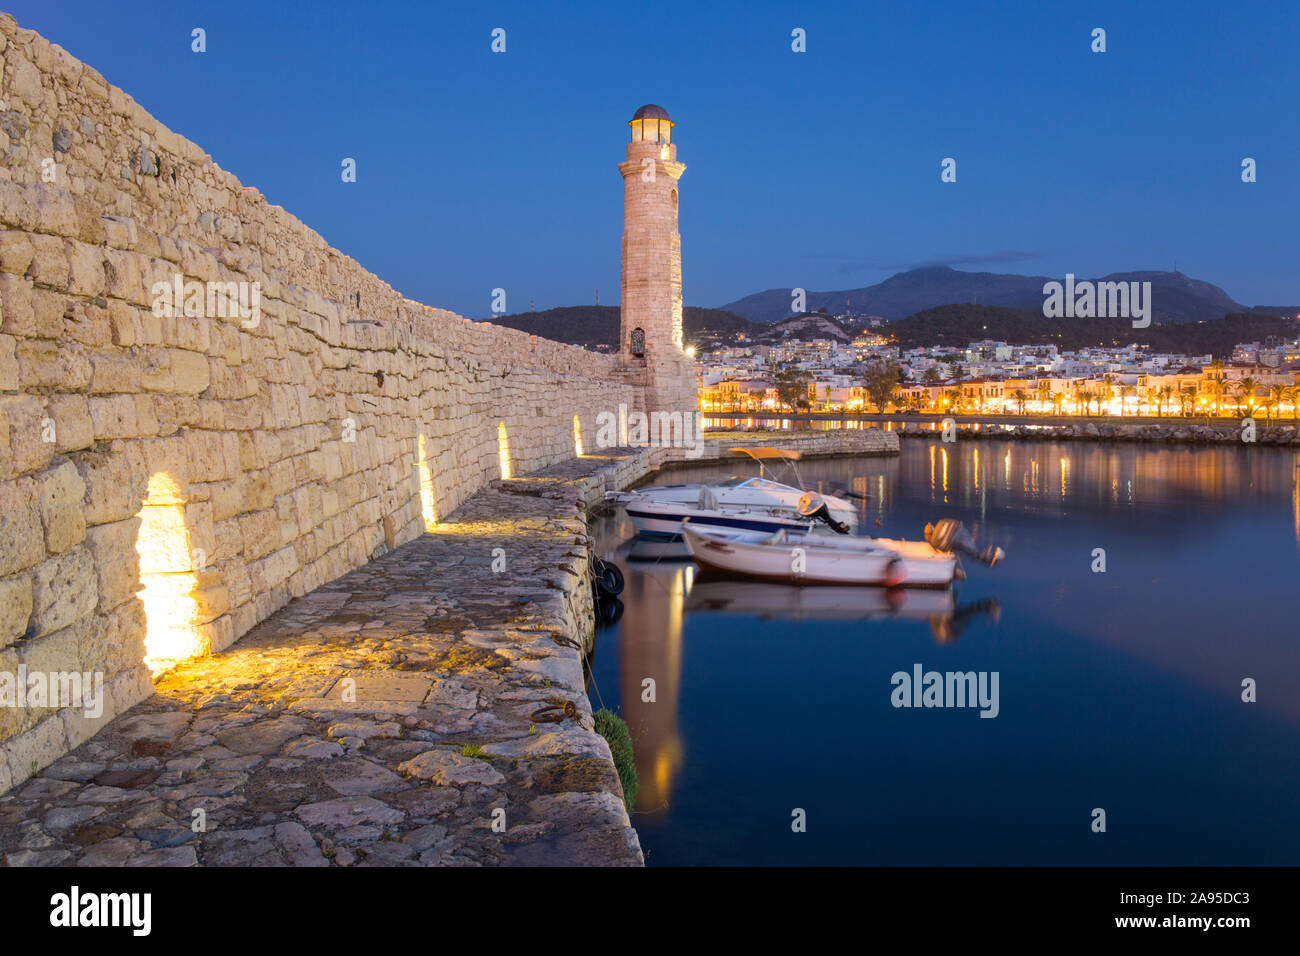 Rethymno, Crete, Greece. View along wall of the Venetian Harbour to illuminated 16th century Turkish lighthouse, dusk. Stock Photo